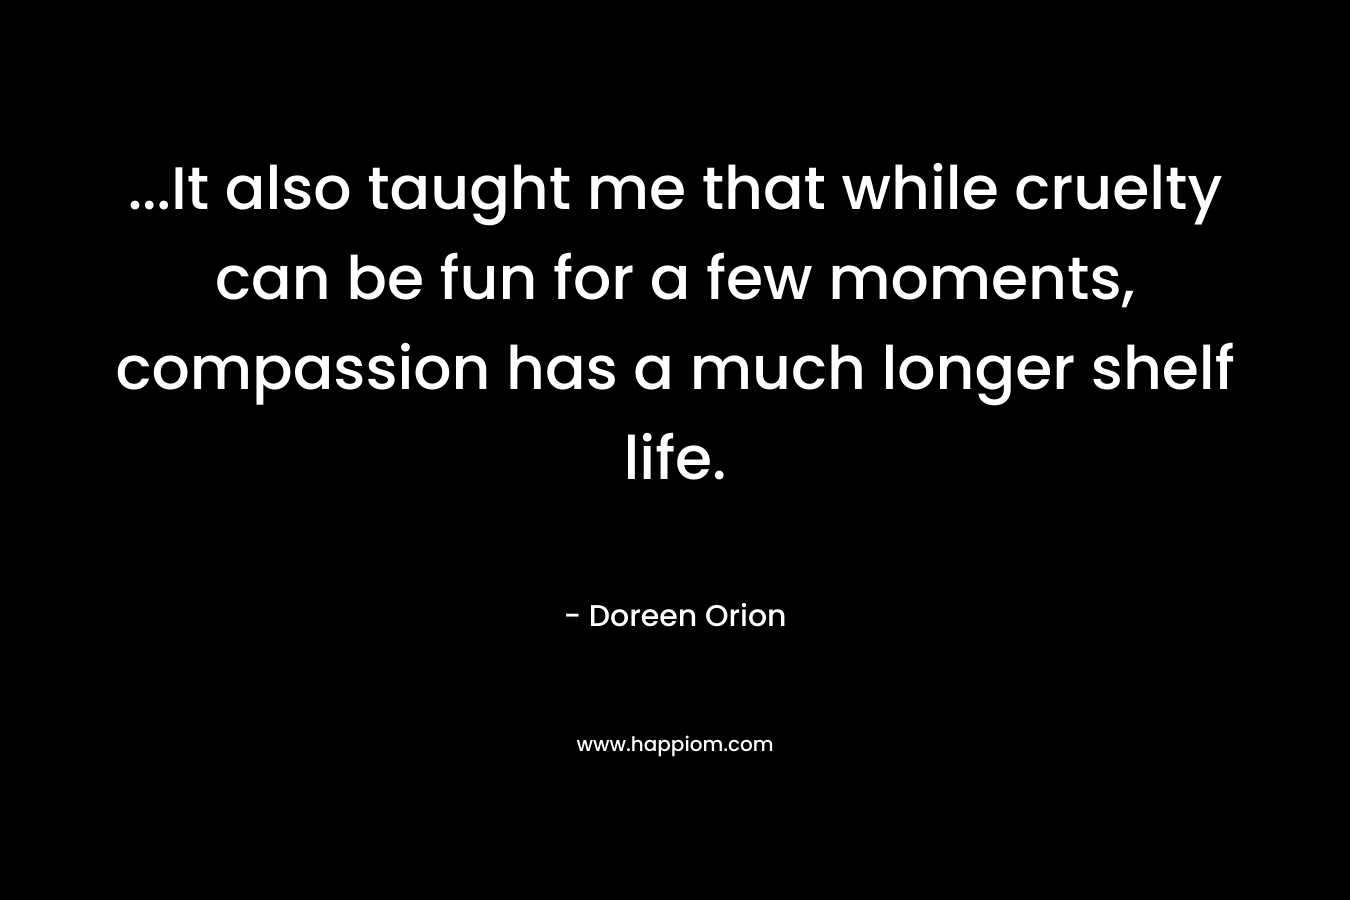 …It also taught me that while cruelty can be fun for a few moments, compassion has a much longer shelf life. – Doreen Orion